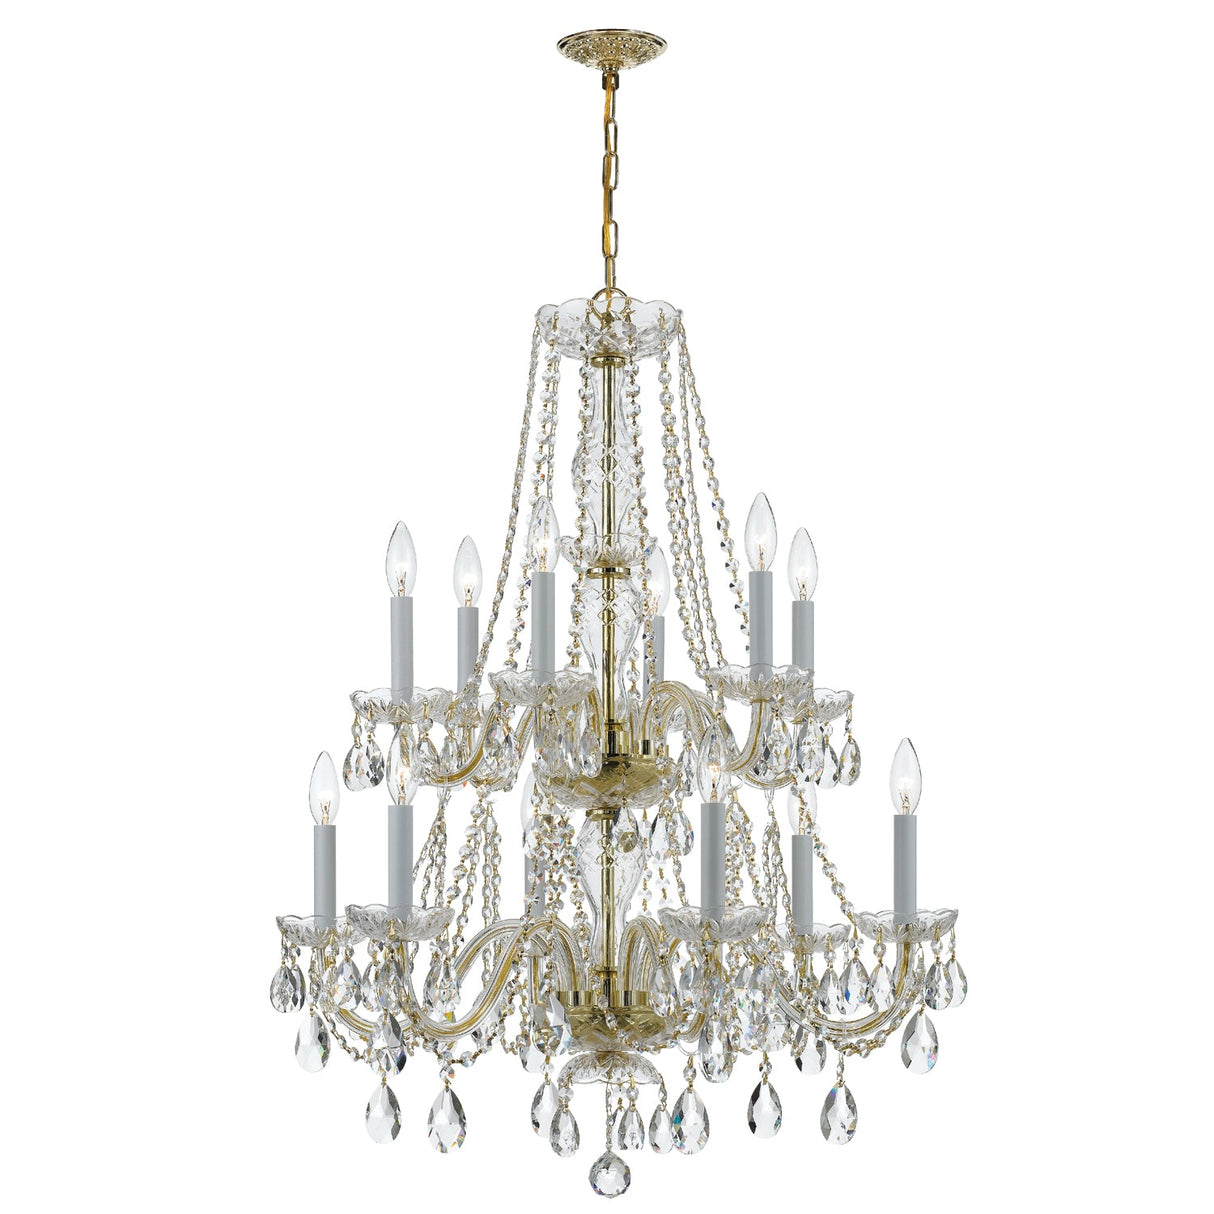 Traditional Crystal 12 Light Spectra Crystal Polished Brass Chandelier 1137-PB-CL-SAQ